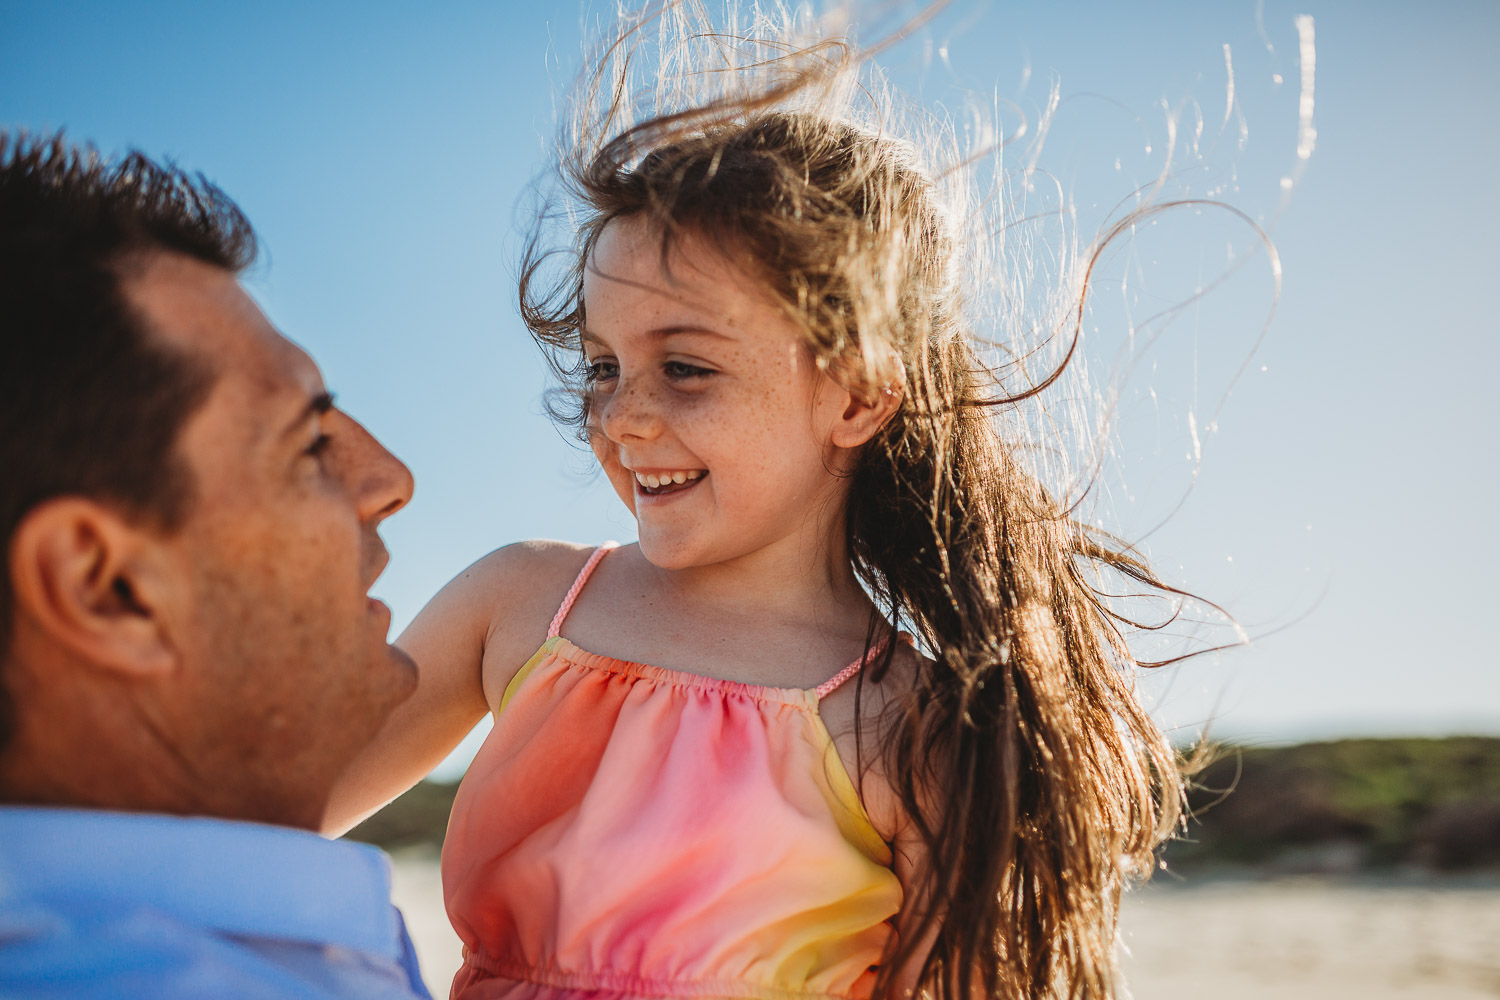 Young girl with windswept hair smiling at her father